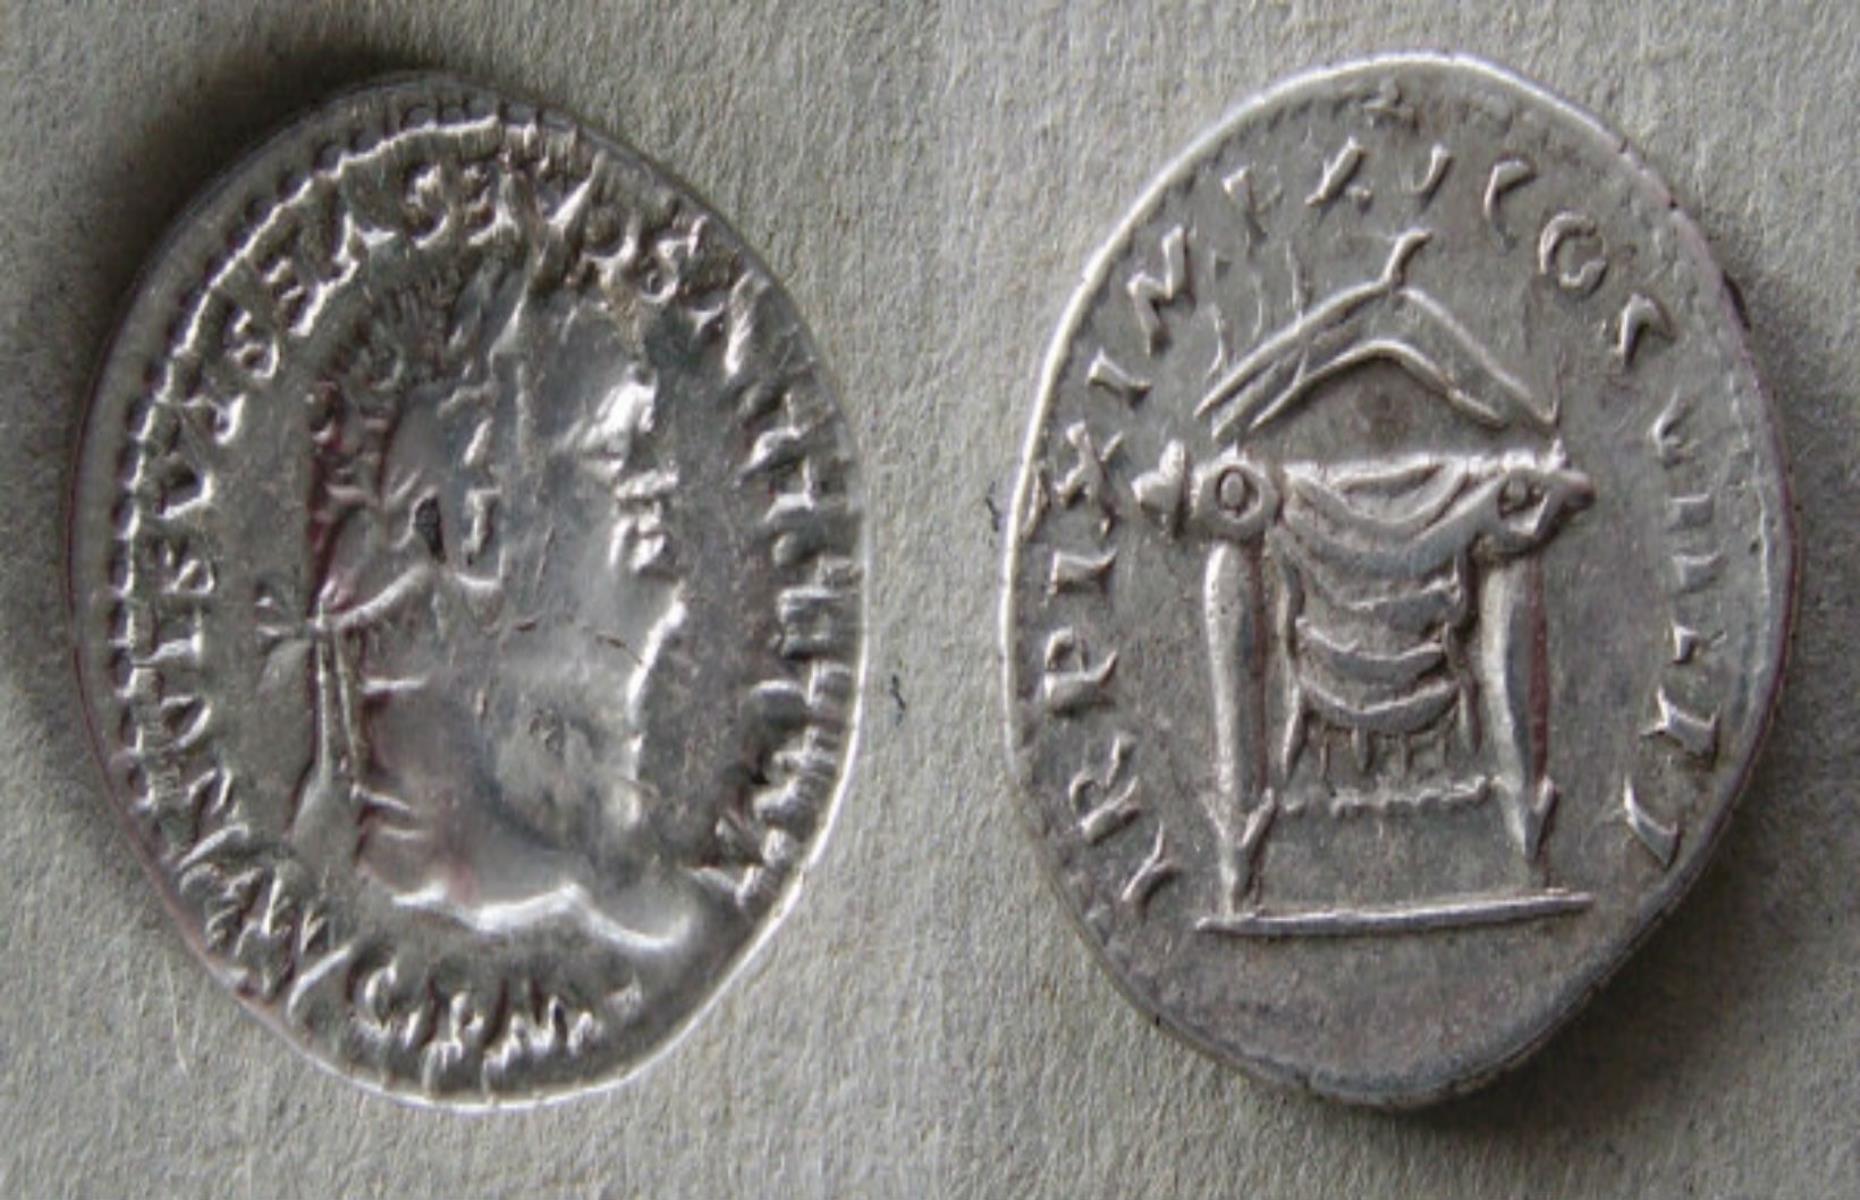 Titus Silver Coin - worth £265